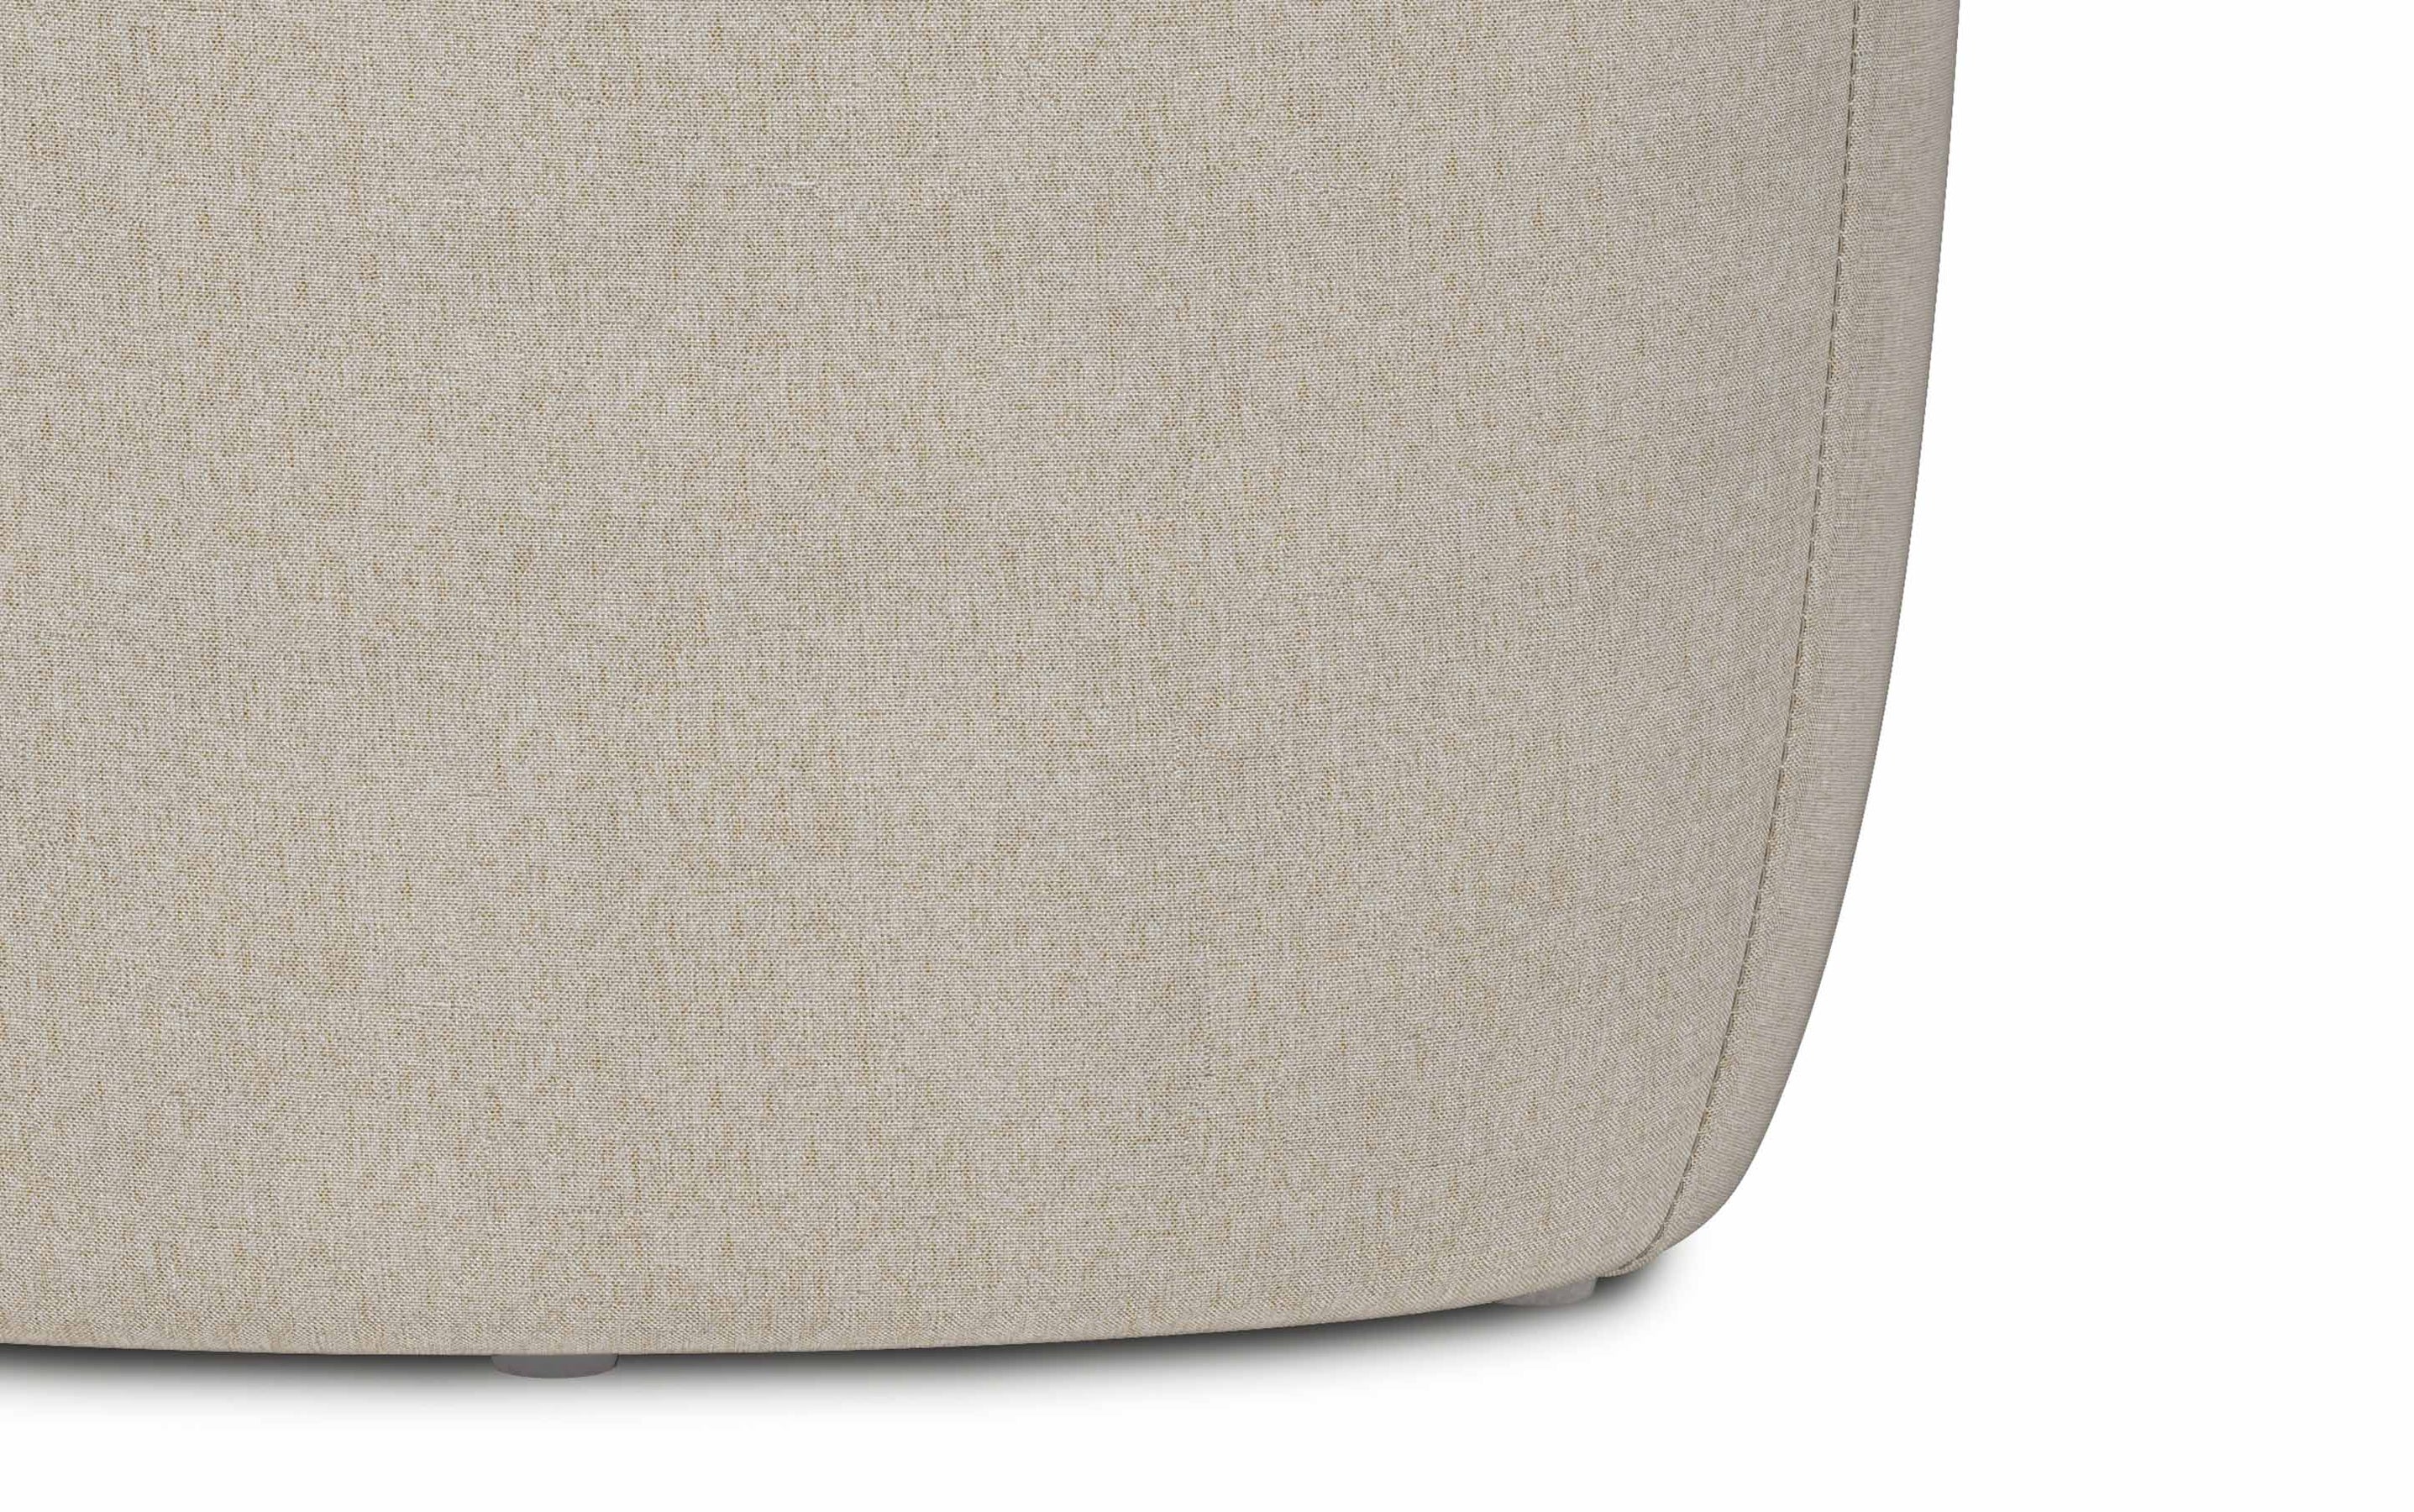 Natural Linen Style Fabric | Moore Small Ottoman in Linen